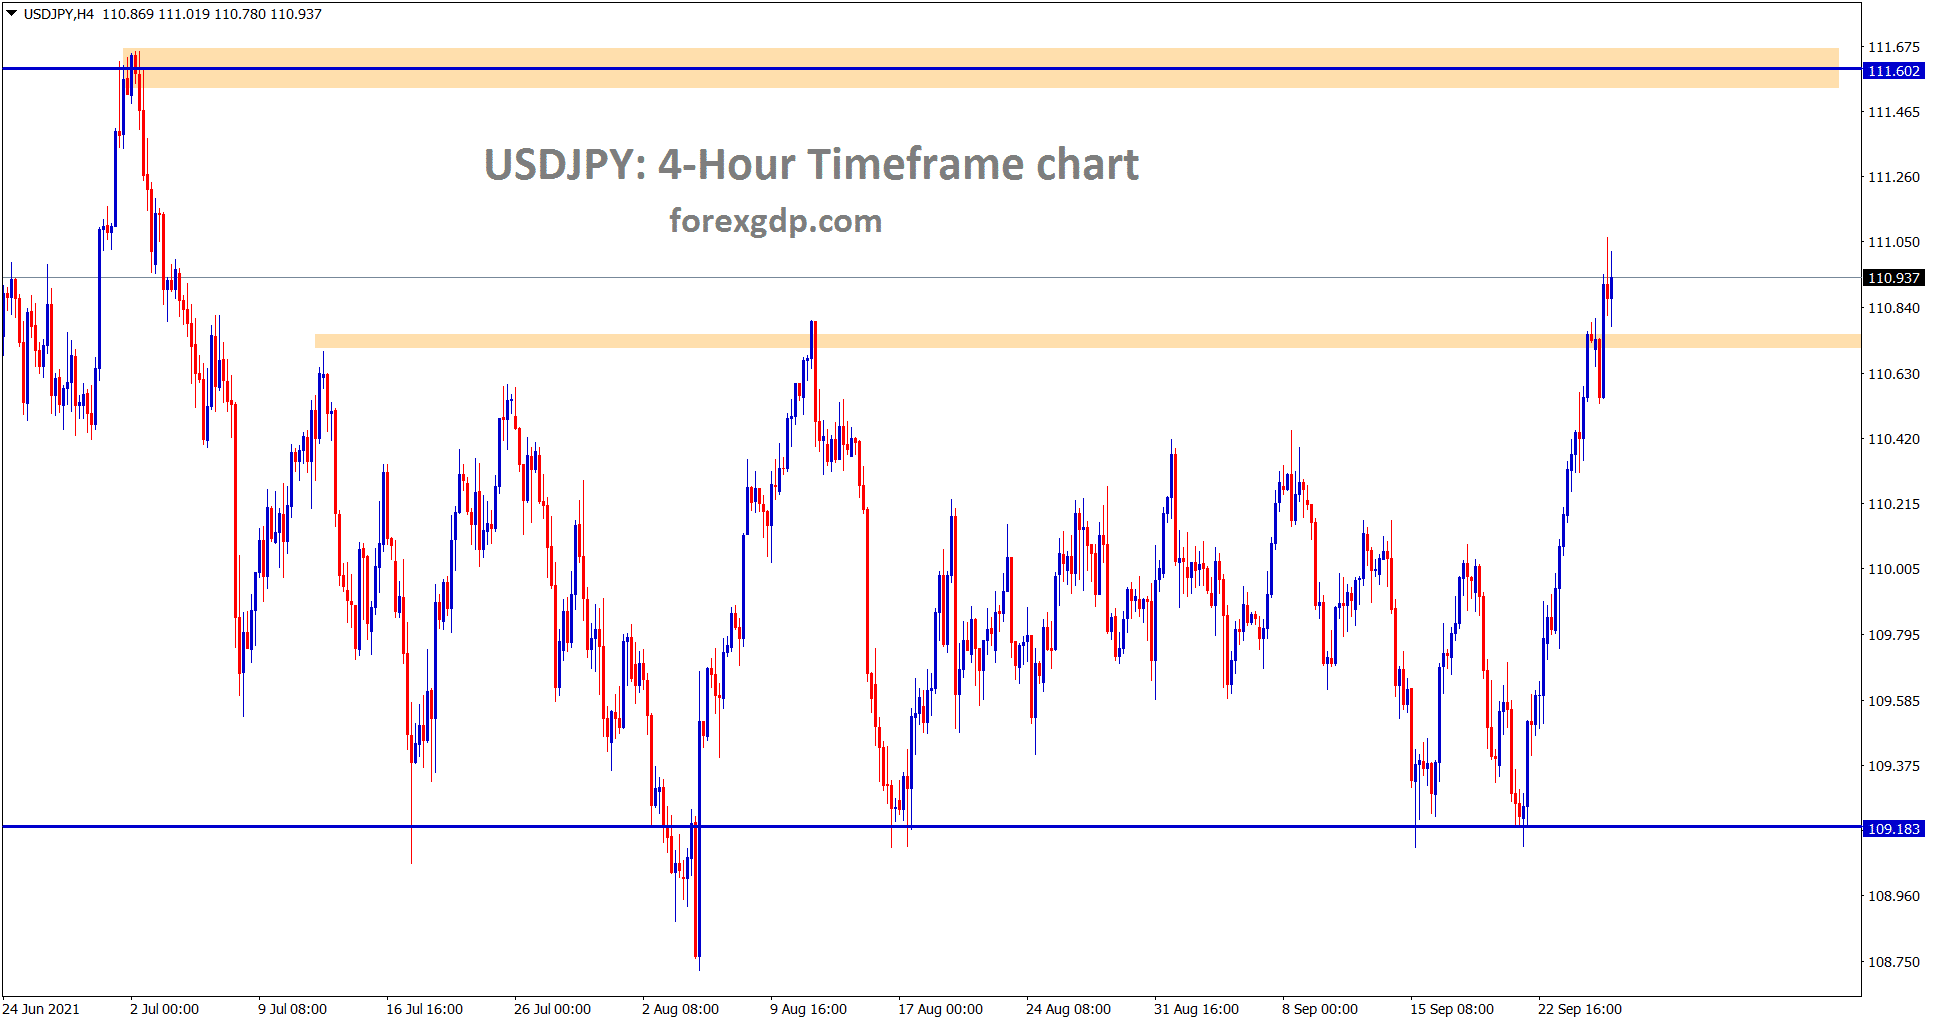 USDJPY has broken all the recent highs in the last week and its trying to move up continuously.